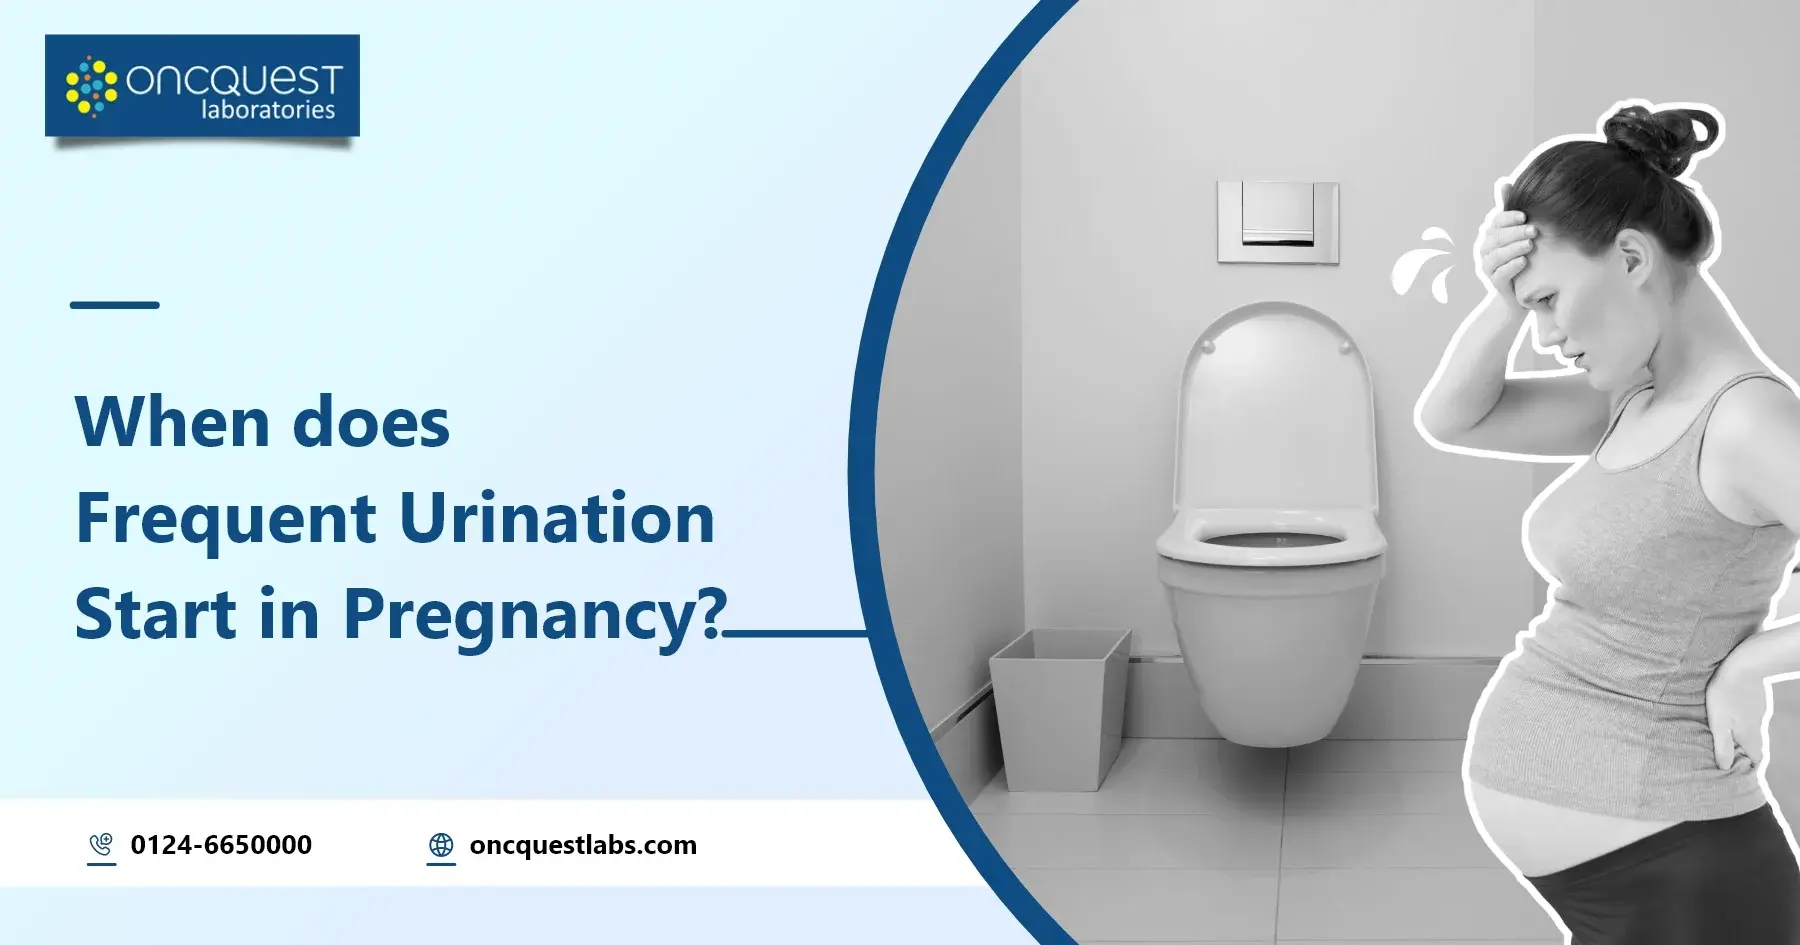 5 Tips To Ease Frequent Urination During The 7th Week Of Pregnancy